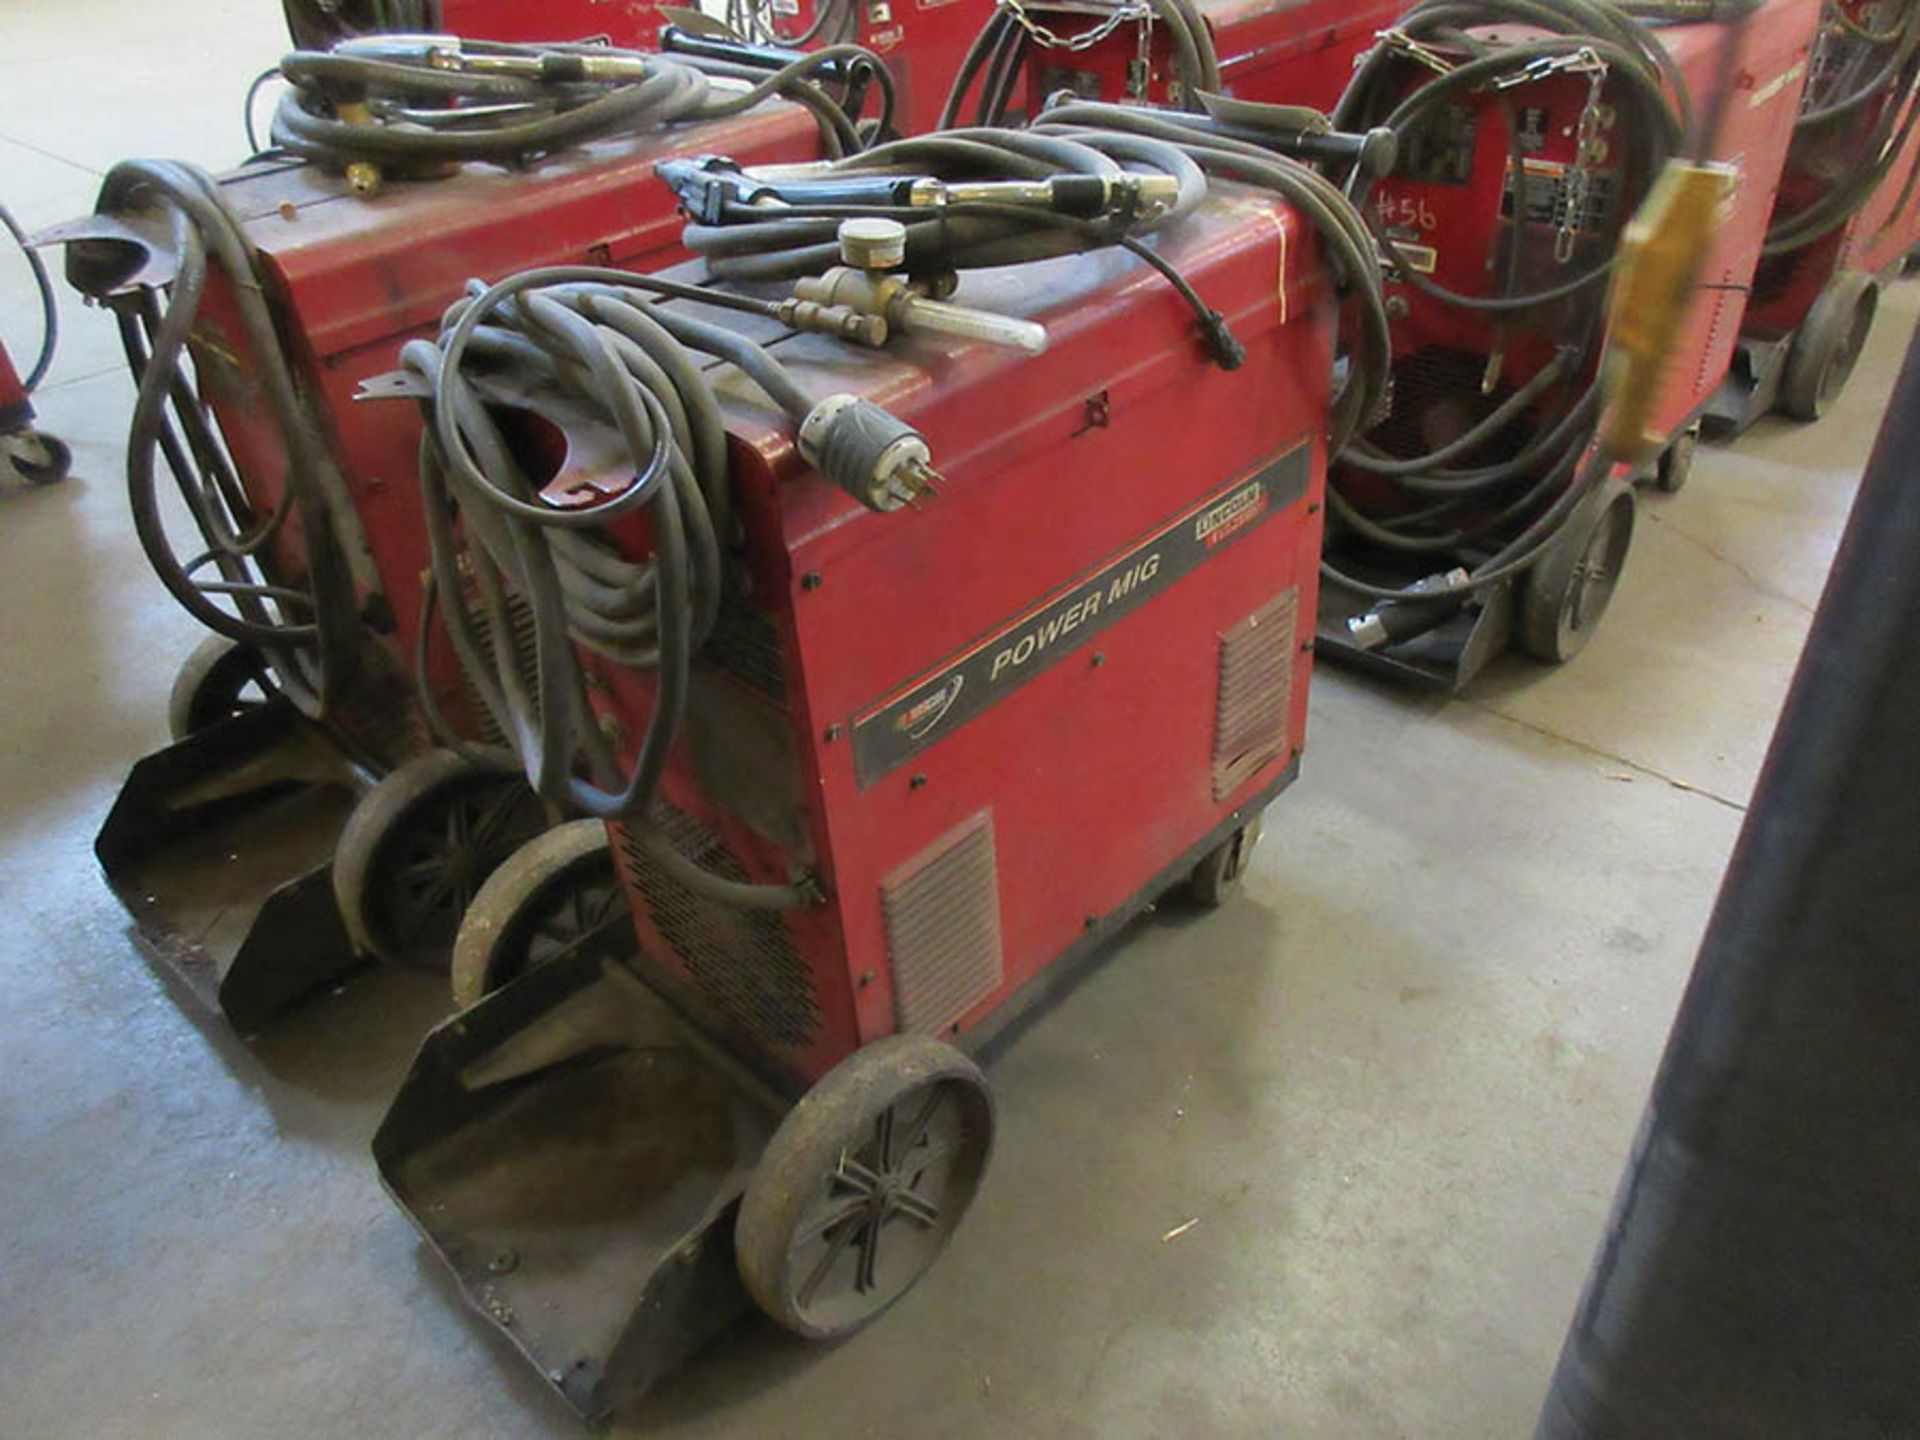 LINCOLN ELECTRIC 350MP POWER MIG WELDER WITH MAGNUM PRO MIG GUN - Image 2 of 3